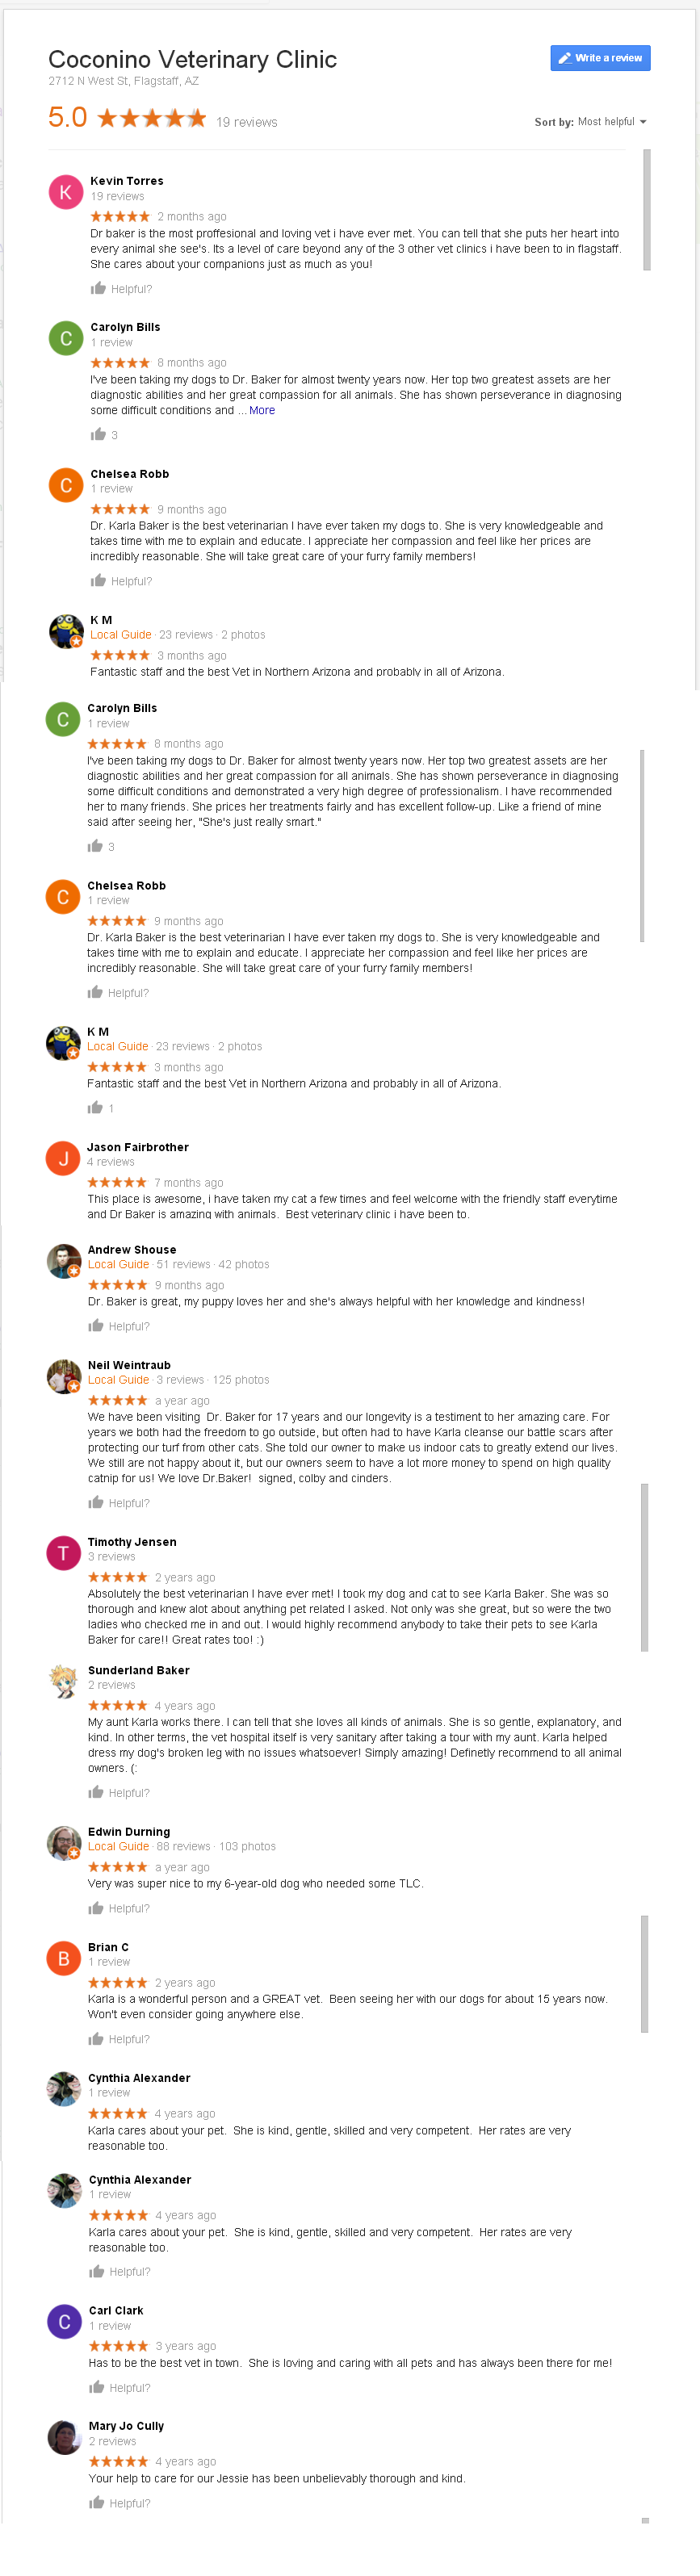 Image of reviews for coconino vet clinic